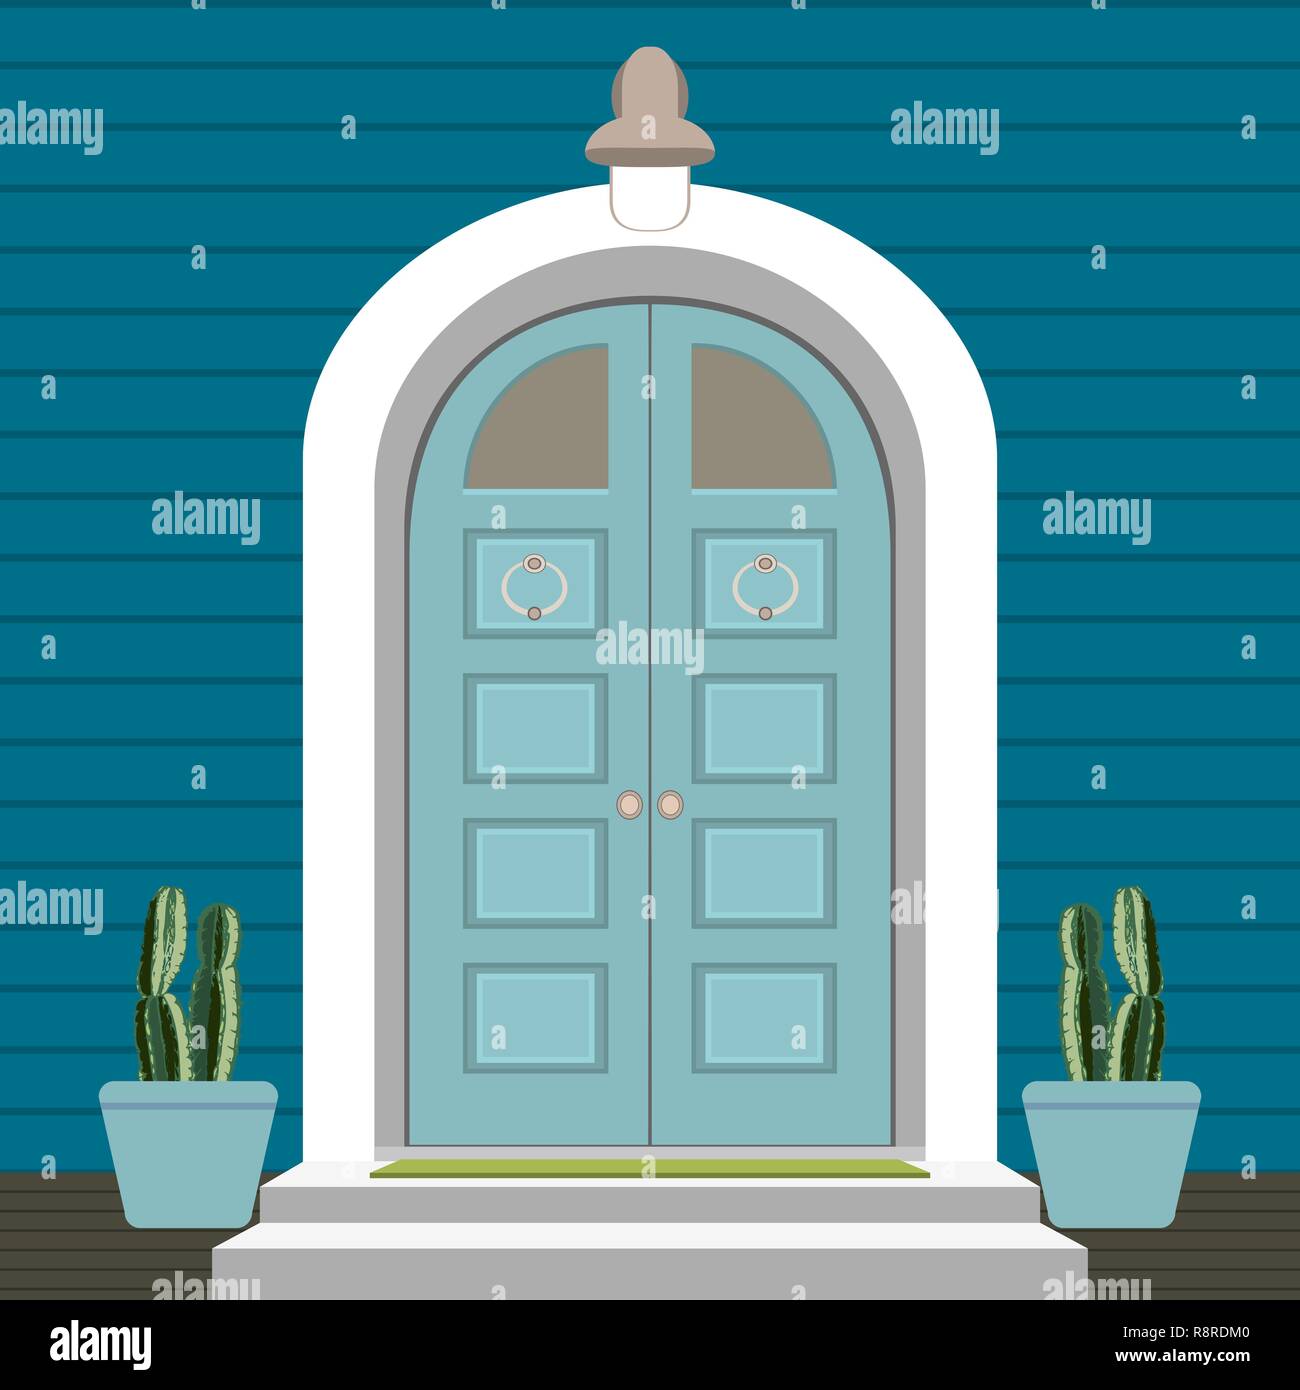 House door front with doorstep and lamps, flowers, entry facade building,  exterior entrance design illustration vector in flat style Stock Vector  Image & Art - Alamy